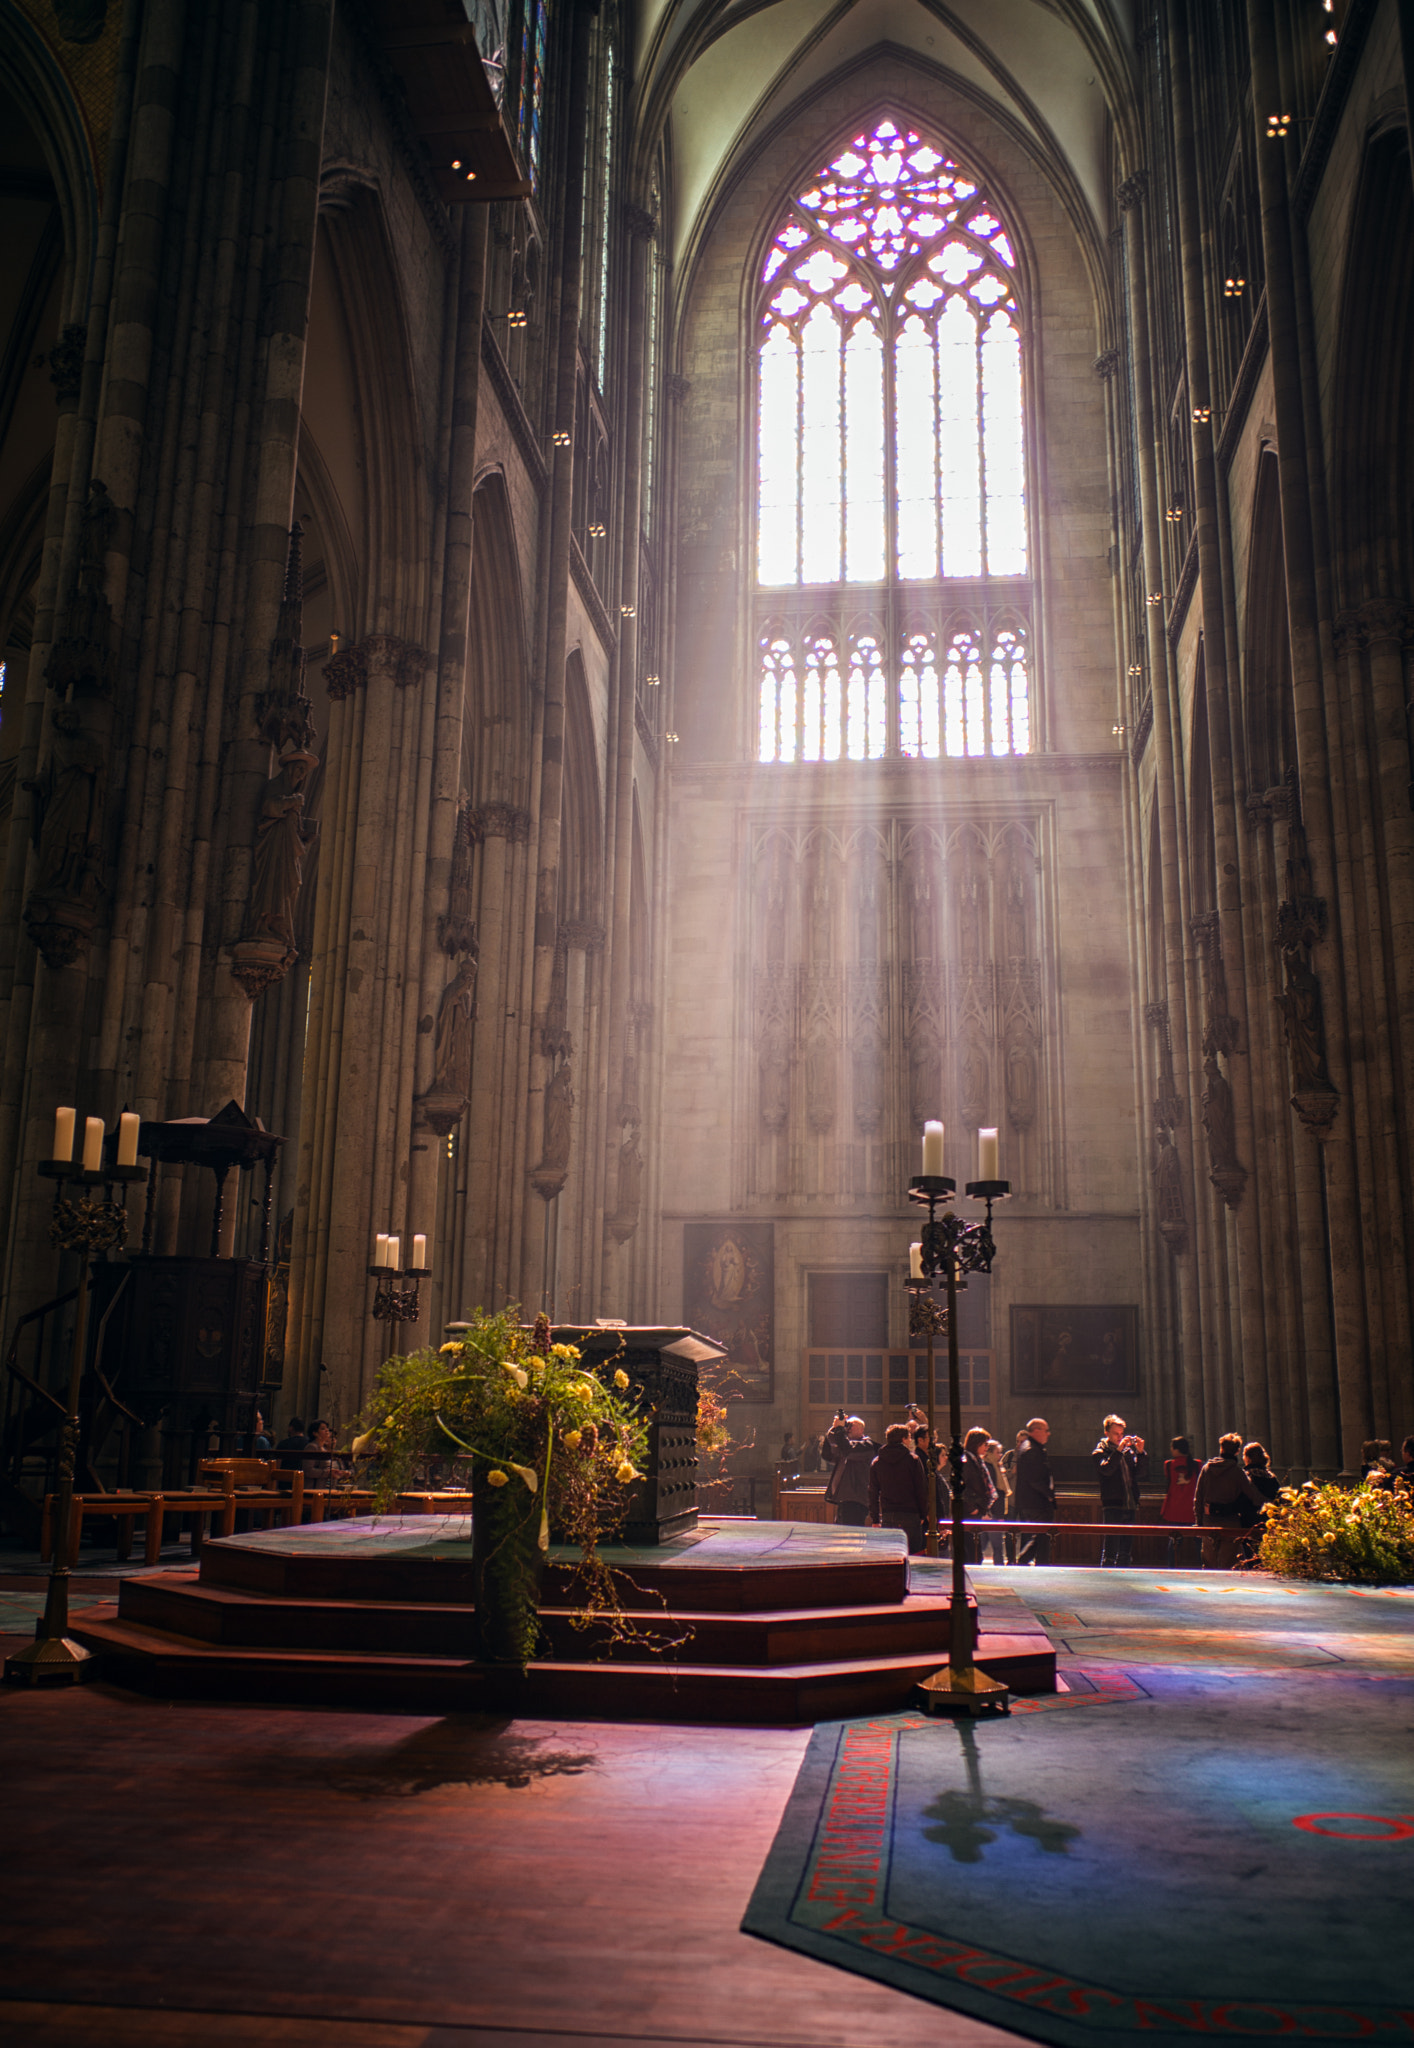 Summicron-M 1:2/28 ASPH. sample photo. Lights in the cathedral photography